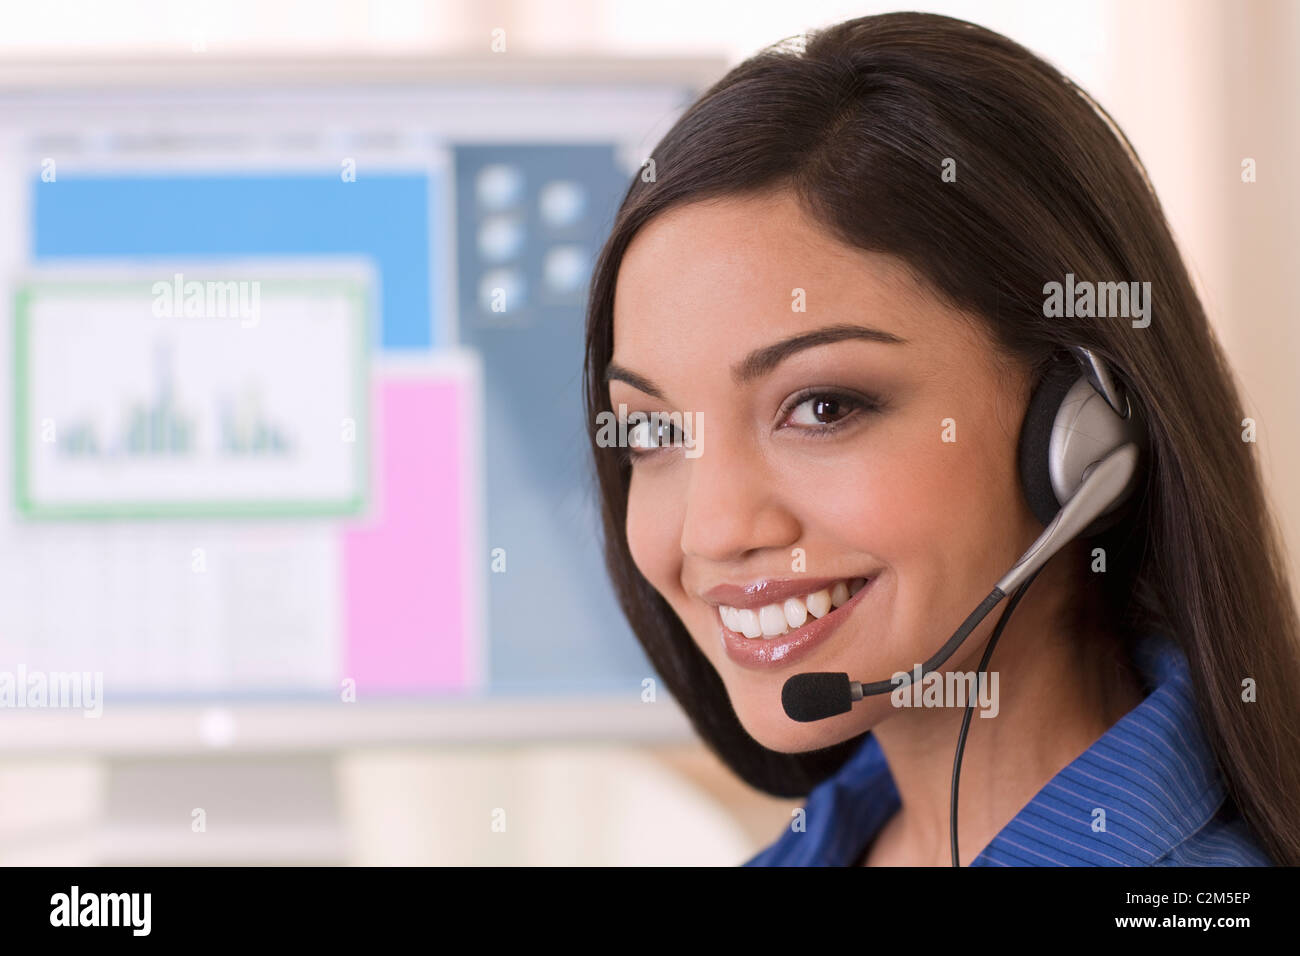 Smiling woman with headset and computer monitor Stock Photo